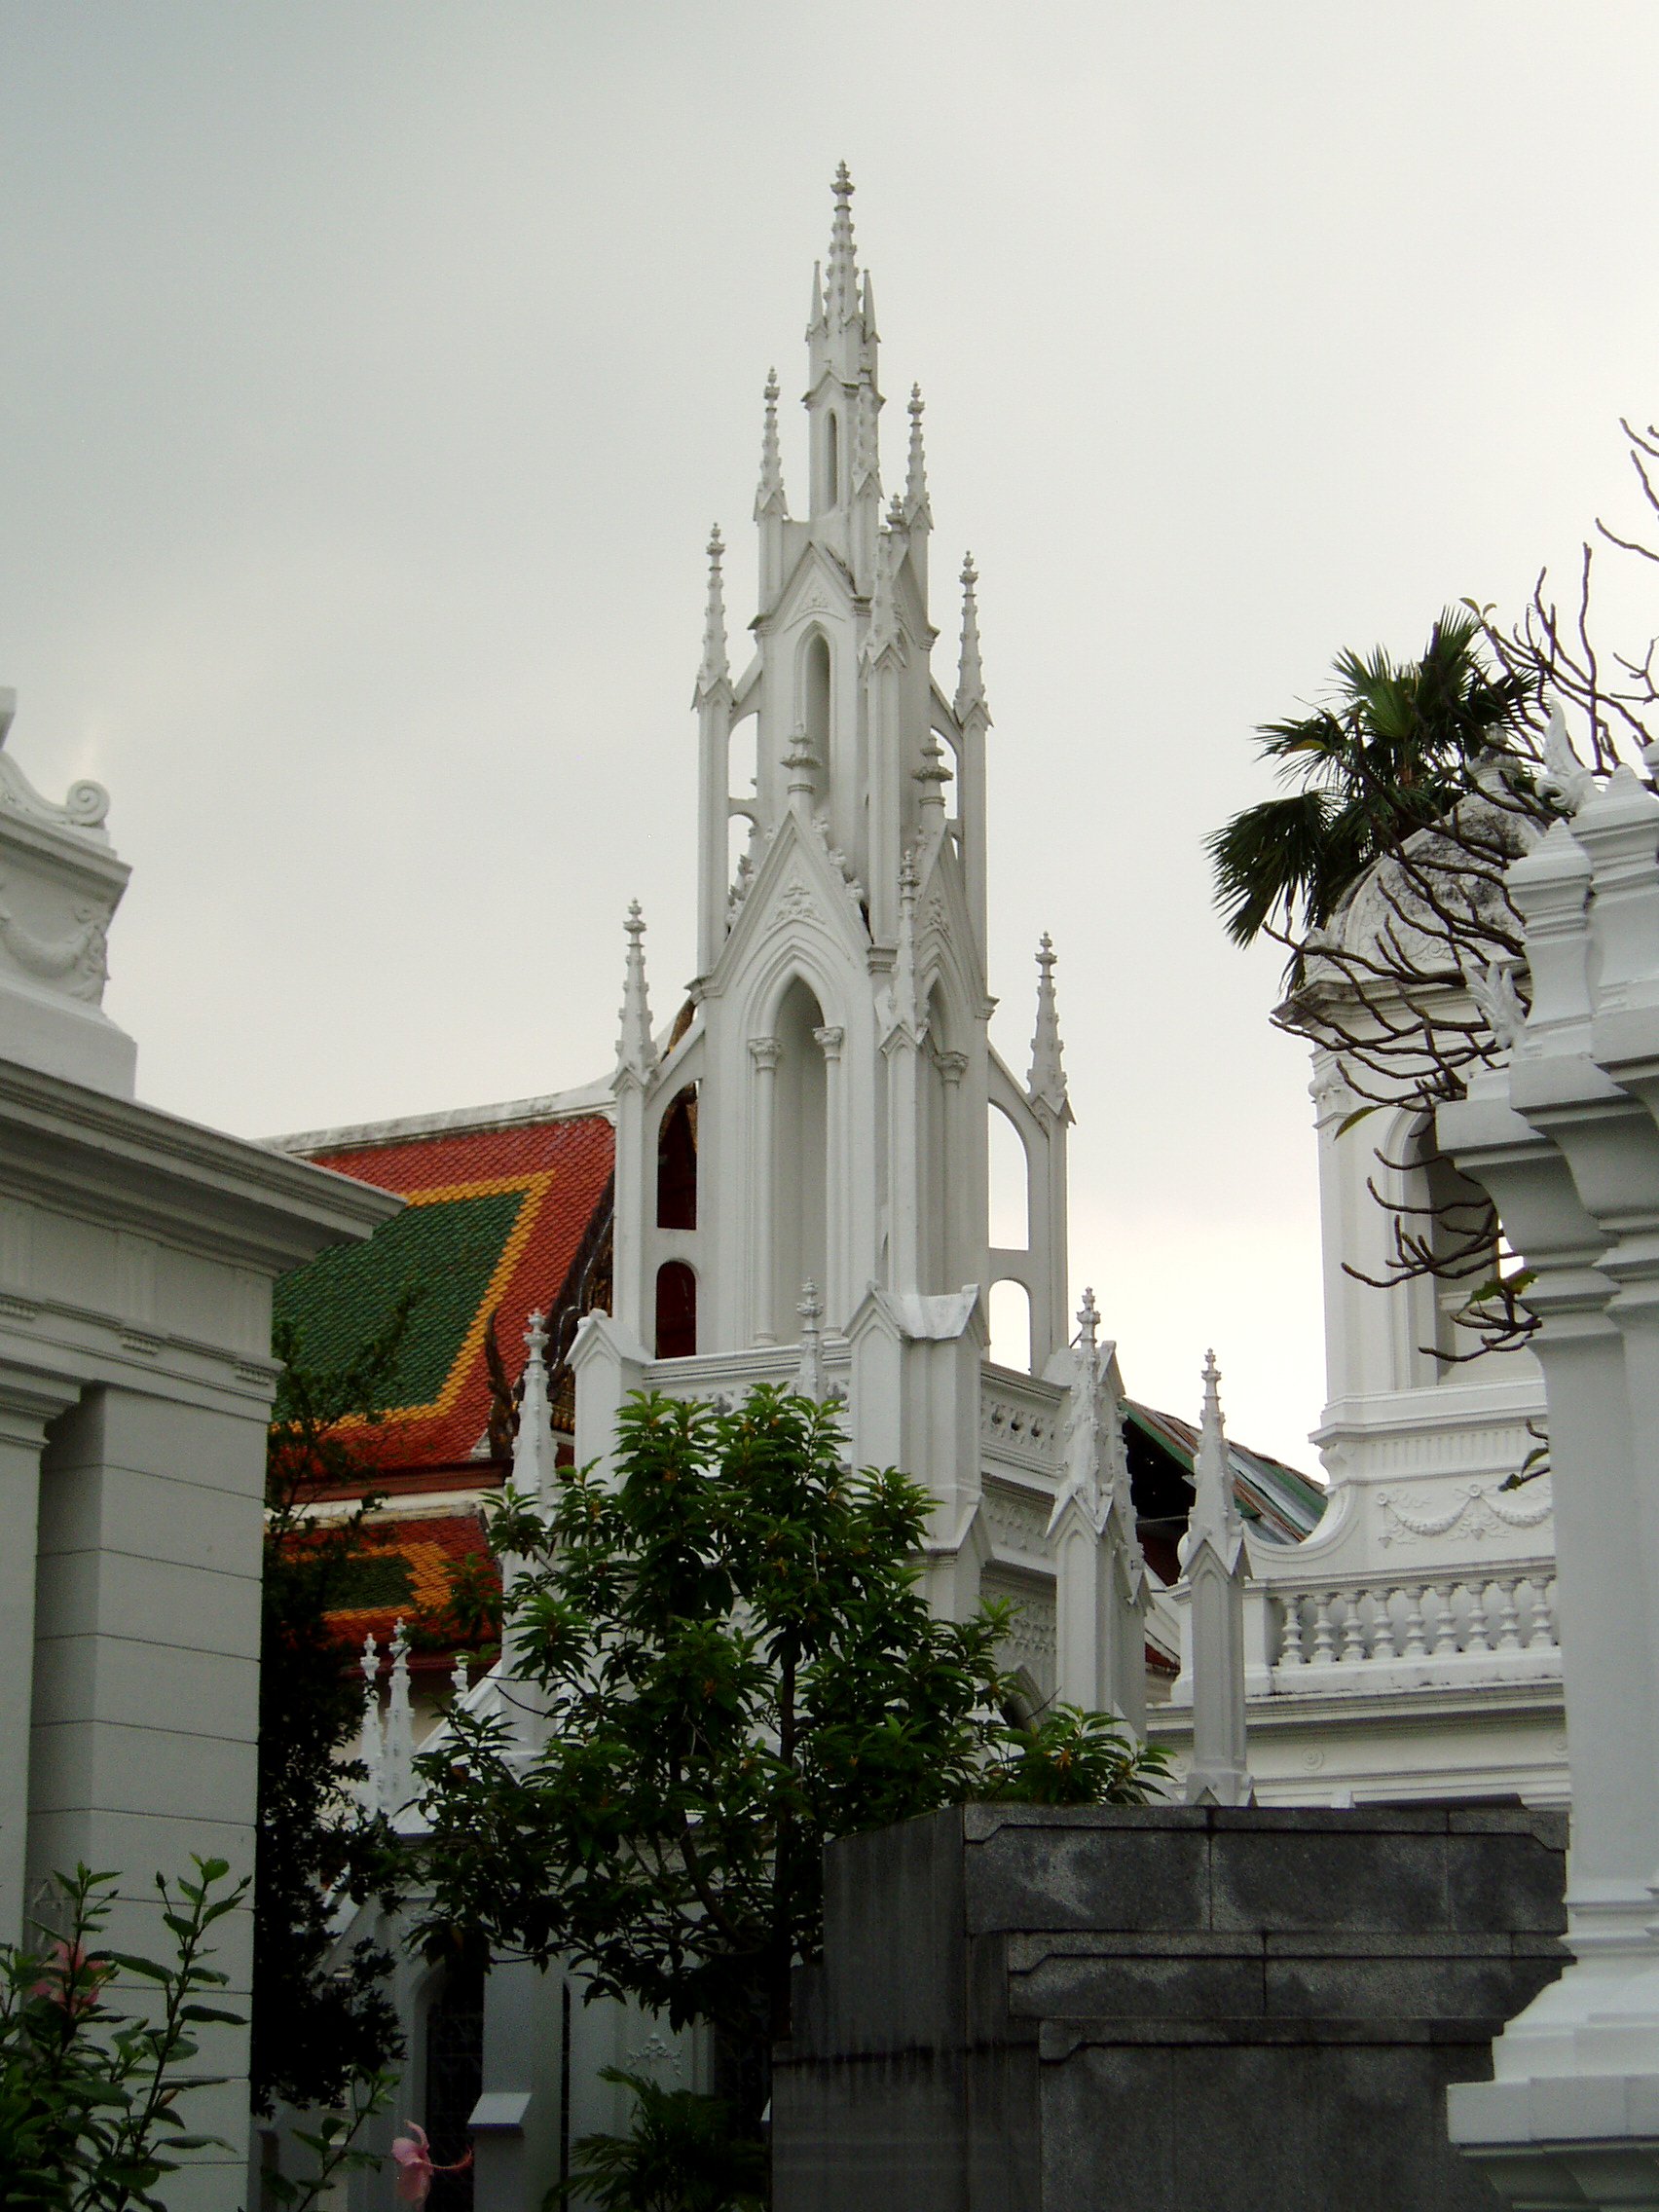 Gothic Steeple, Royal Cemetery, Wat Ratchabophit, Bangkok Wat Ratchabophit is one of the most unusual temples in Bangkok; built in the latter half of the 19th century it shows marked European influence in certain areas, such as the neo-gothic interior of the main bot (prayer hall) and many of the monuments in the adjoining Royal Cemetery, that includes a domed classical style tower and pinnacled gothic steeples amongst more traditional Thai and Khmer style structures. The centrepiece of the Temple is the huge tile-covered stupa that grows from the heart of the complex and is surrounded by a tight circular courtyard. The surrounding structures are richly decorated and gilded with typical Thai richness. The entrance gates to the temple compound have carved and painted door panels with bizarre figures that appear to be 'farang' (foreign/European) guards holding rifles! en.wikipedia.org/wiki/Wat_Ratchabophit